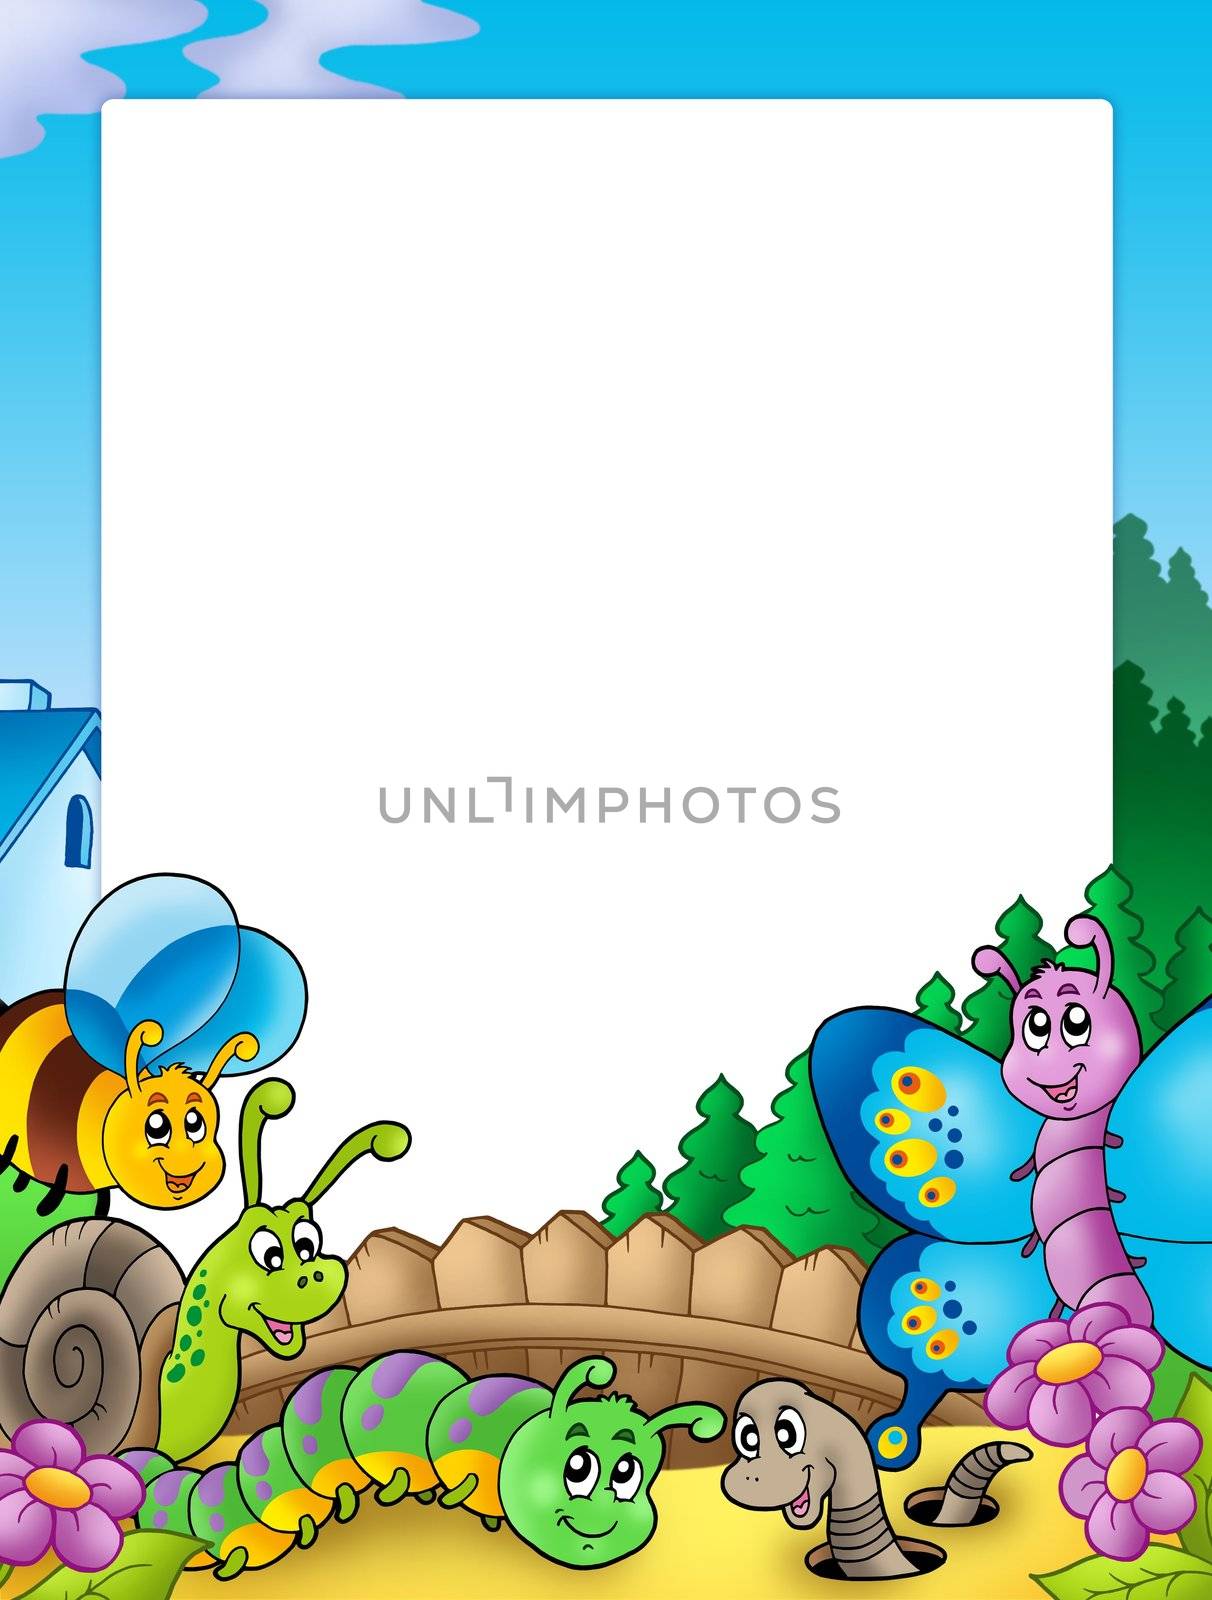 Frame with various garden animals - color illustration.